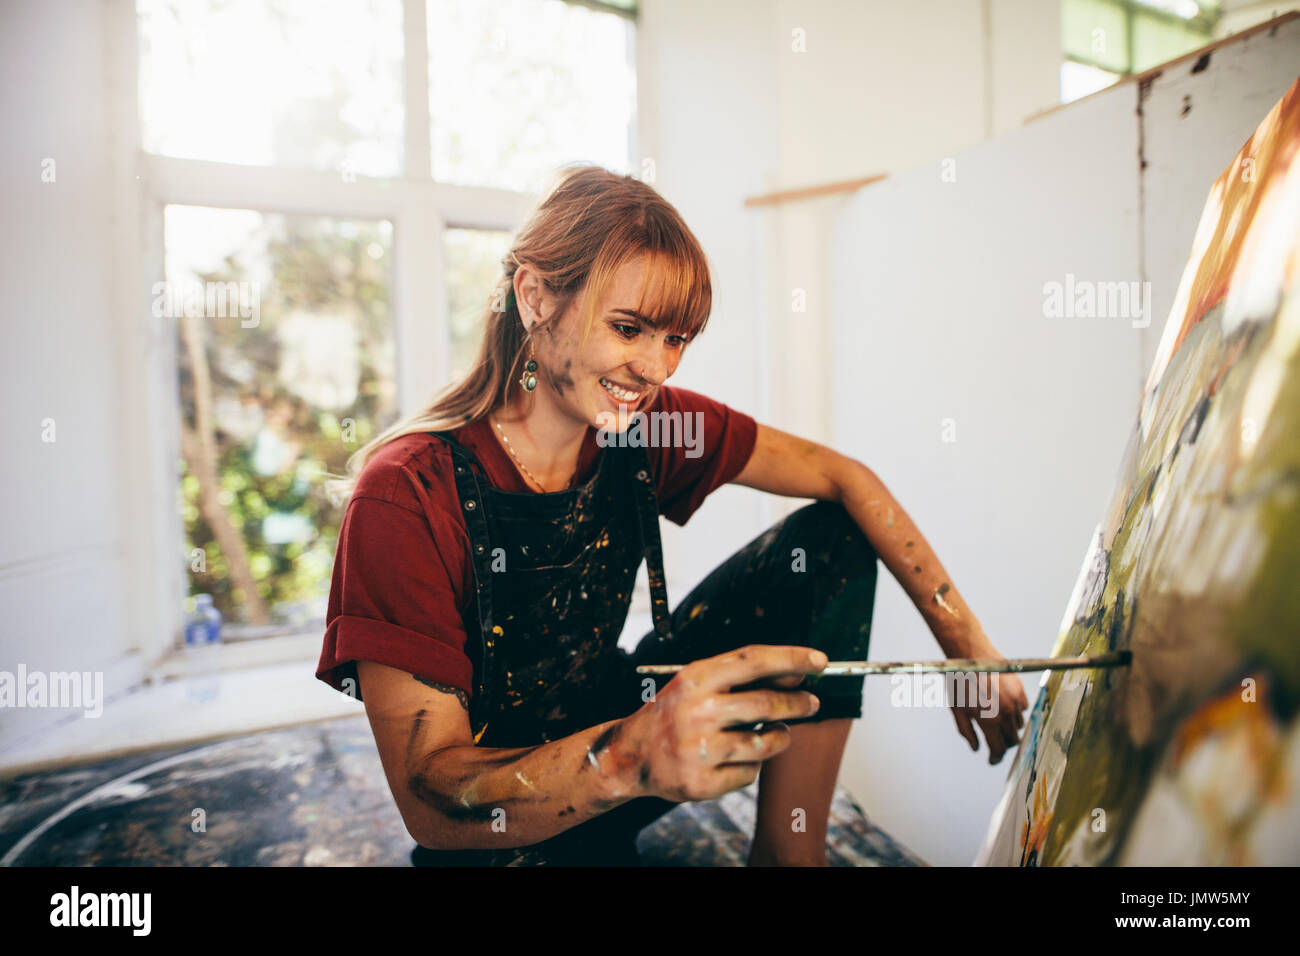 Indoor shot of professional female artist painting on canvas in studio. Woman painter painting in her workshop. Stock Photo